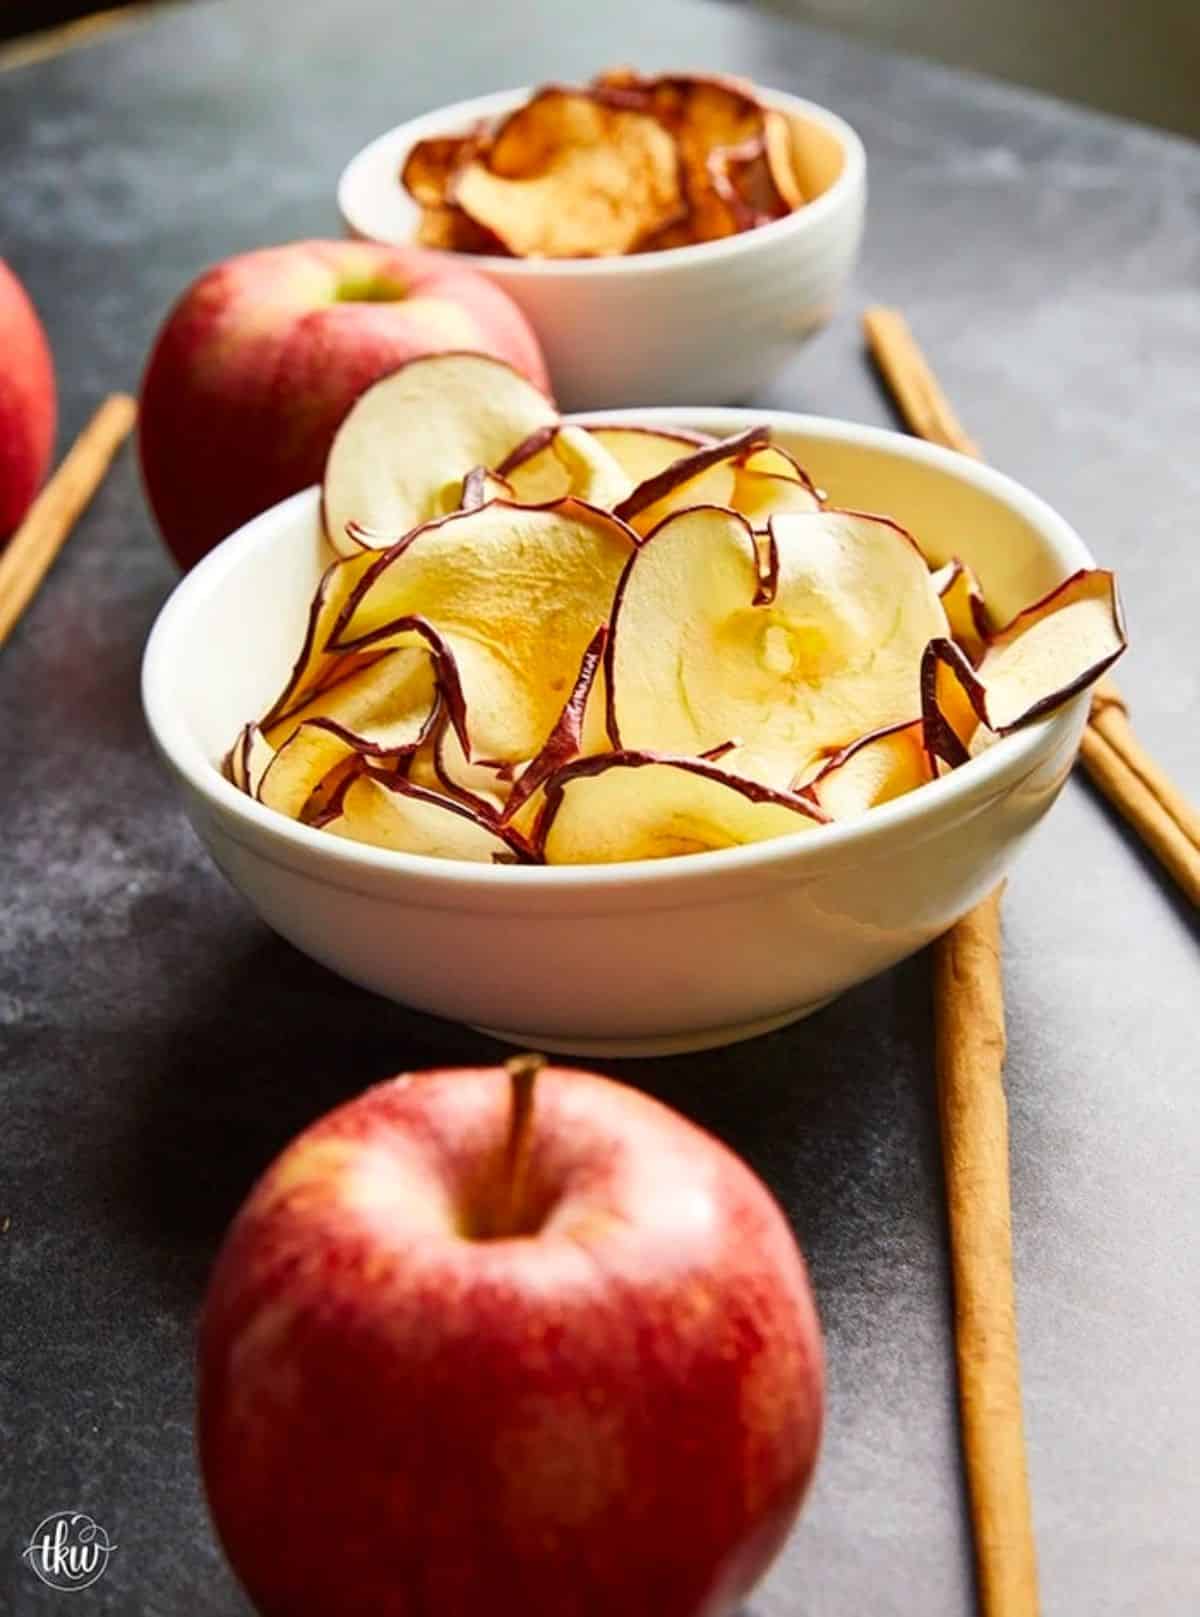 Homemade apple chips in a white bowl with whole apples on a table.